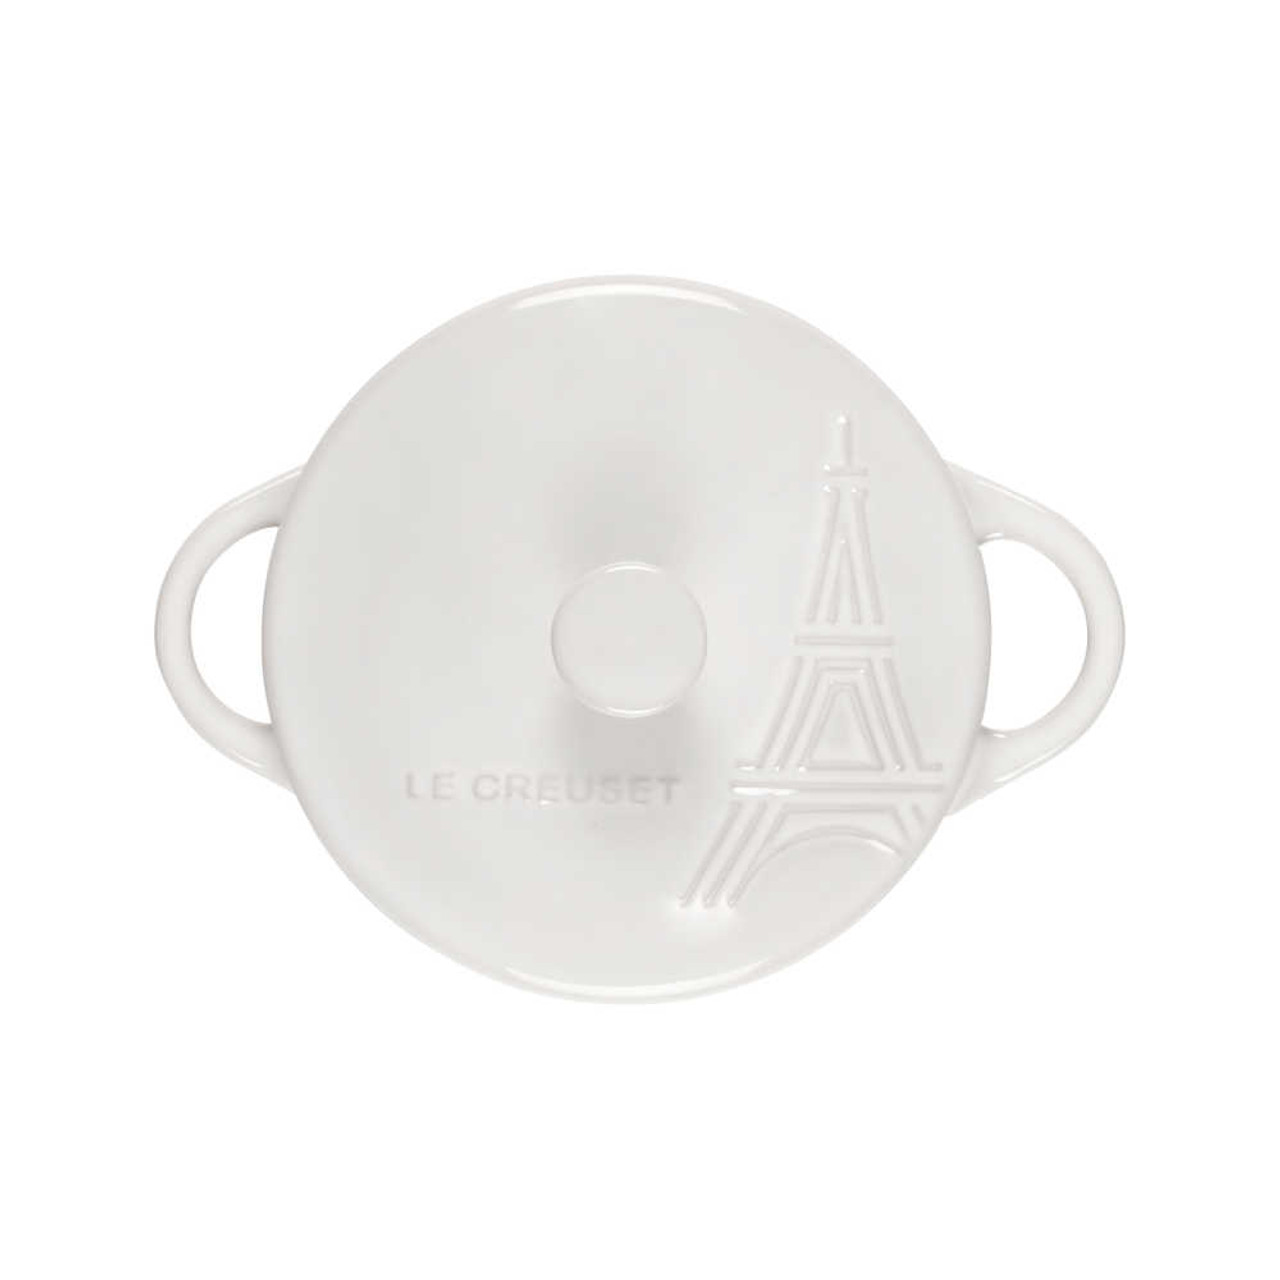 https://cdn11.bigcommerce.com/s-hccytny0od/images/stencil/1280x1280/products/4879/20319/Le_Creuset_Eiffel_Tower_Collection_Mini_Cocotte_in_White__57234.1657236548.jpg?c=2?imbypass=on